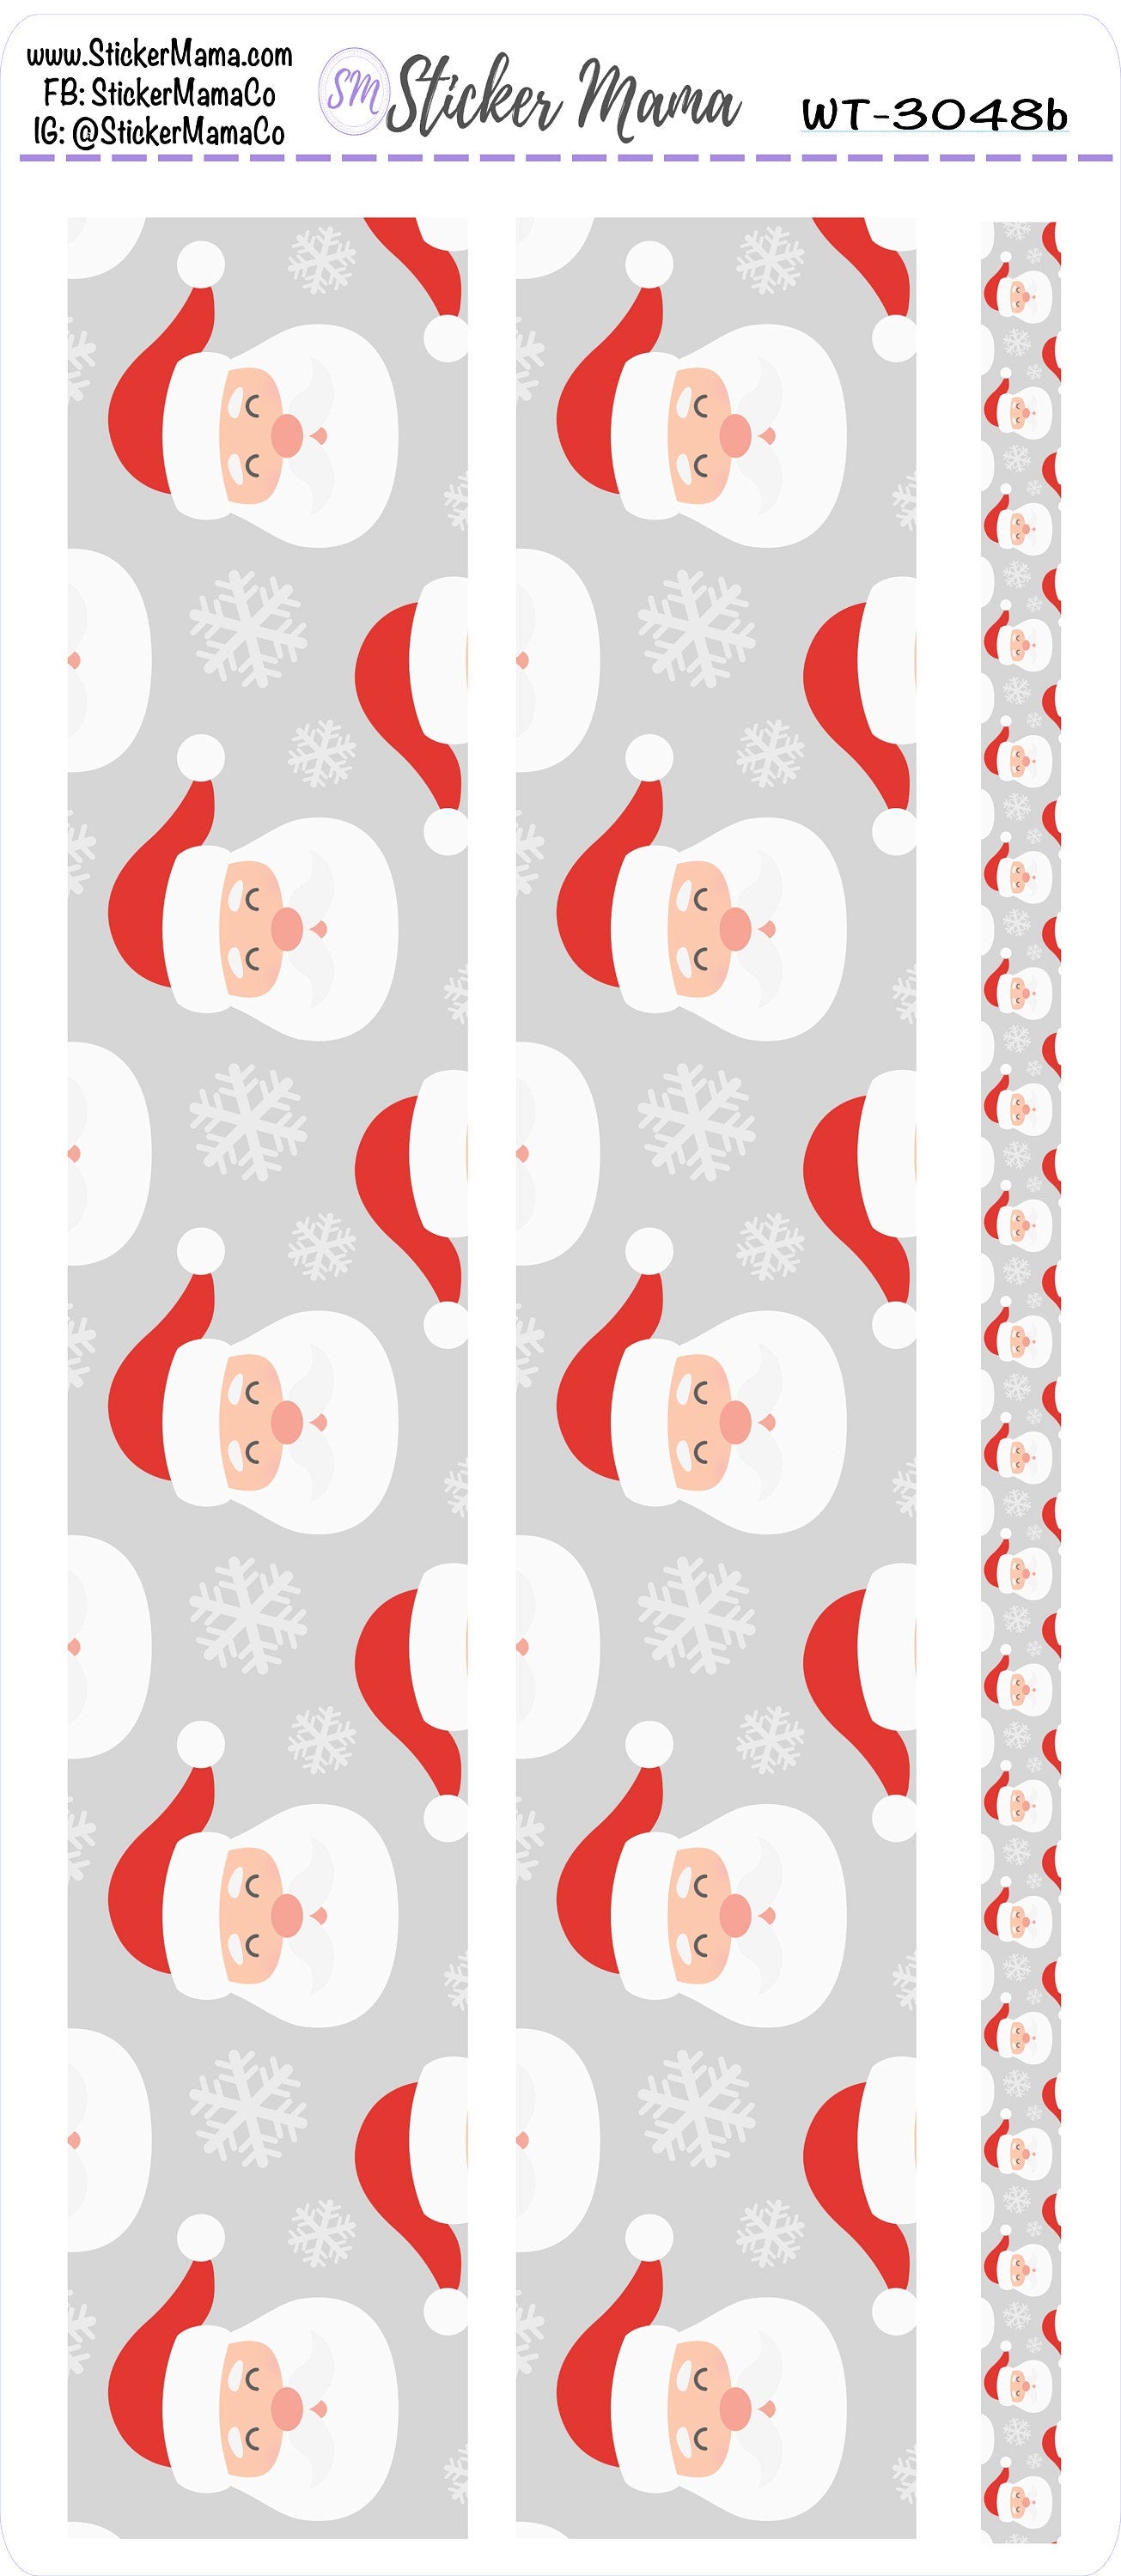 W-3048- WASHI STICKERS - New Christmas - Planner Stickers - Washi for Planners